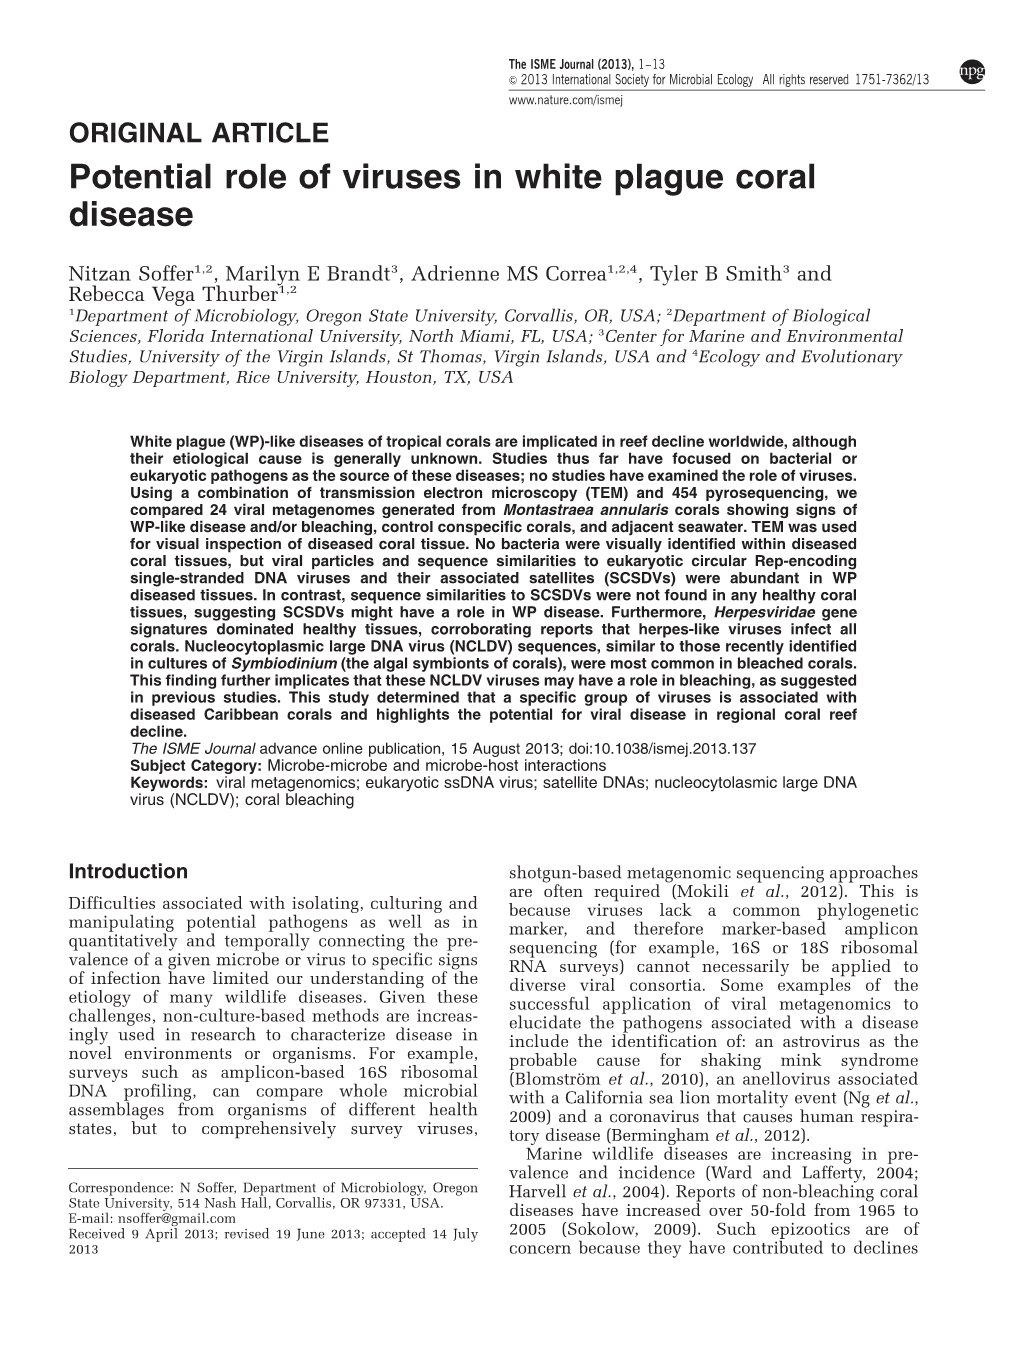 Potential Role of Viruses in White Plague Coral Disease